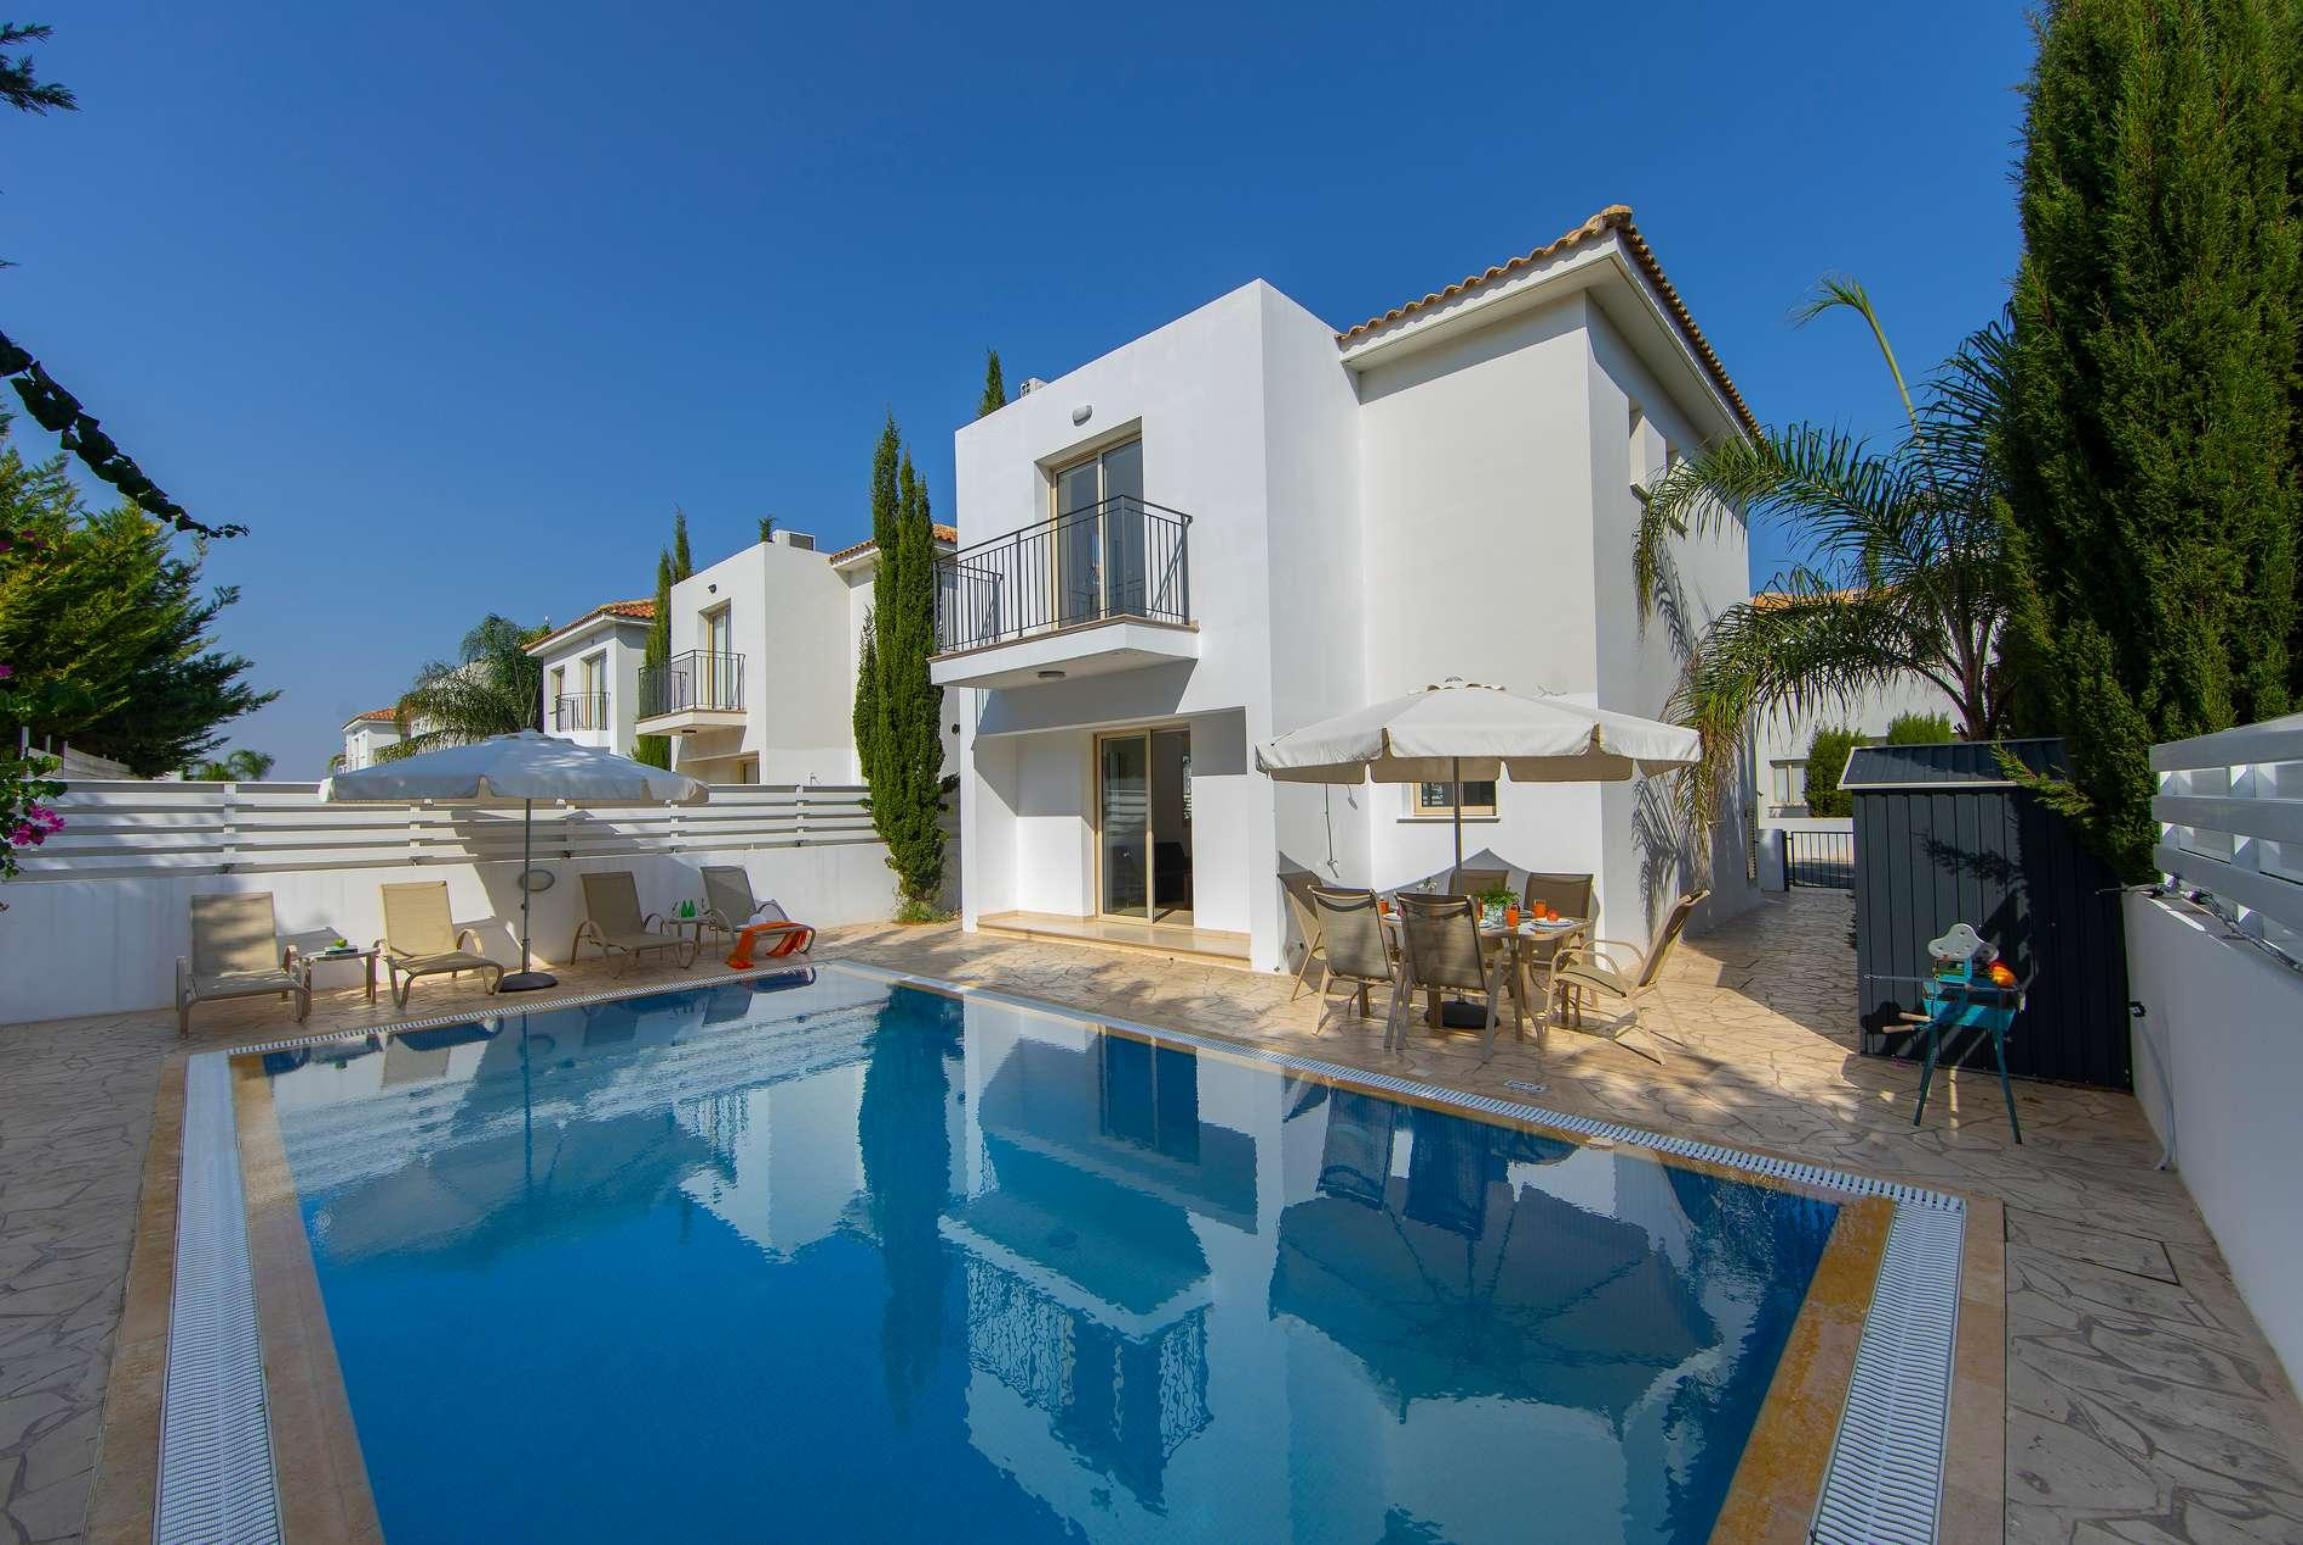 Property Image 1 - Lovely villa perfect for families, great pool area